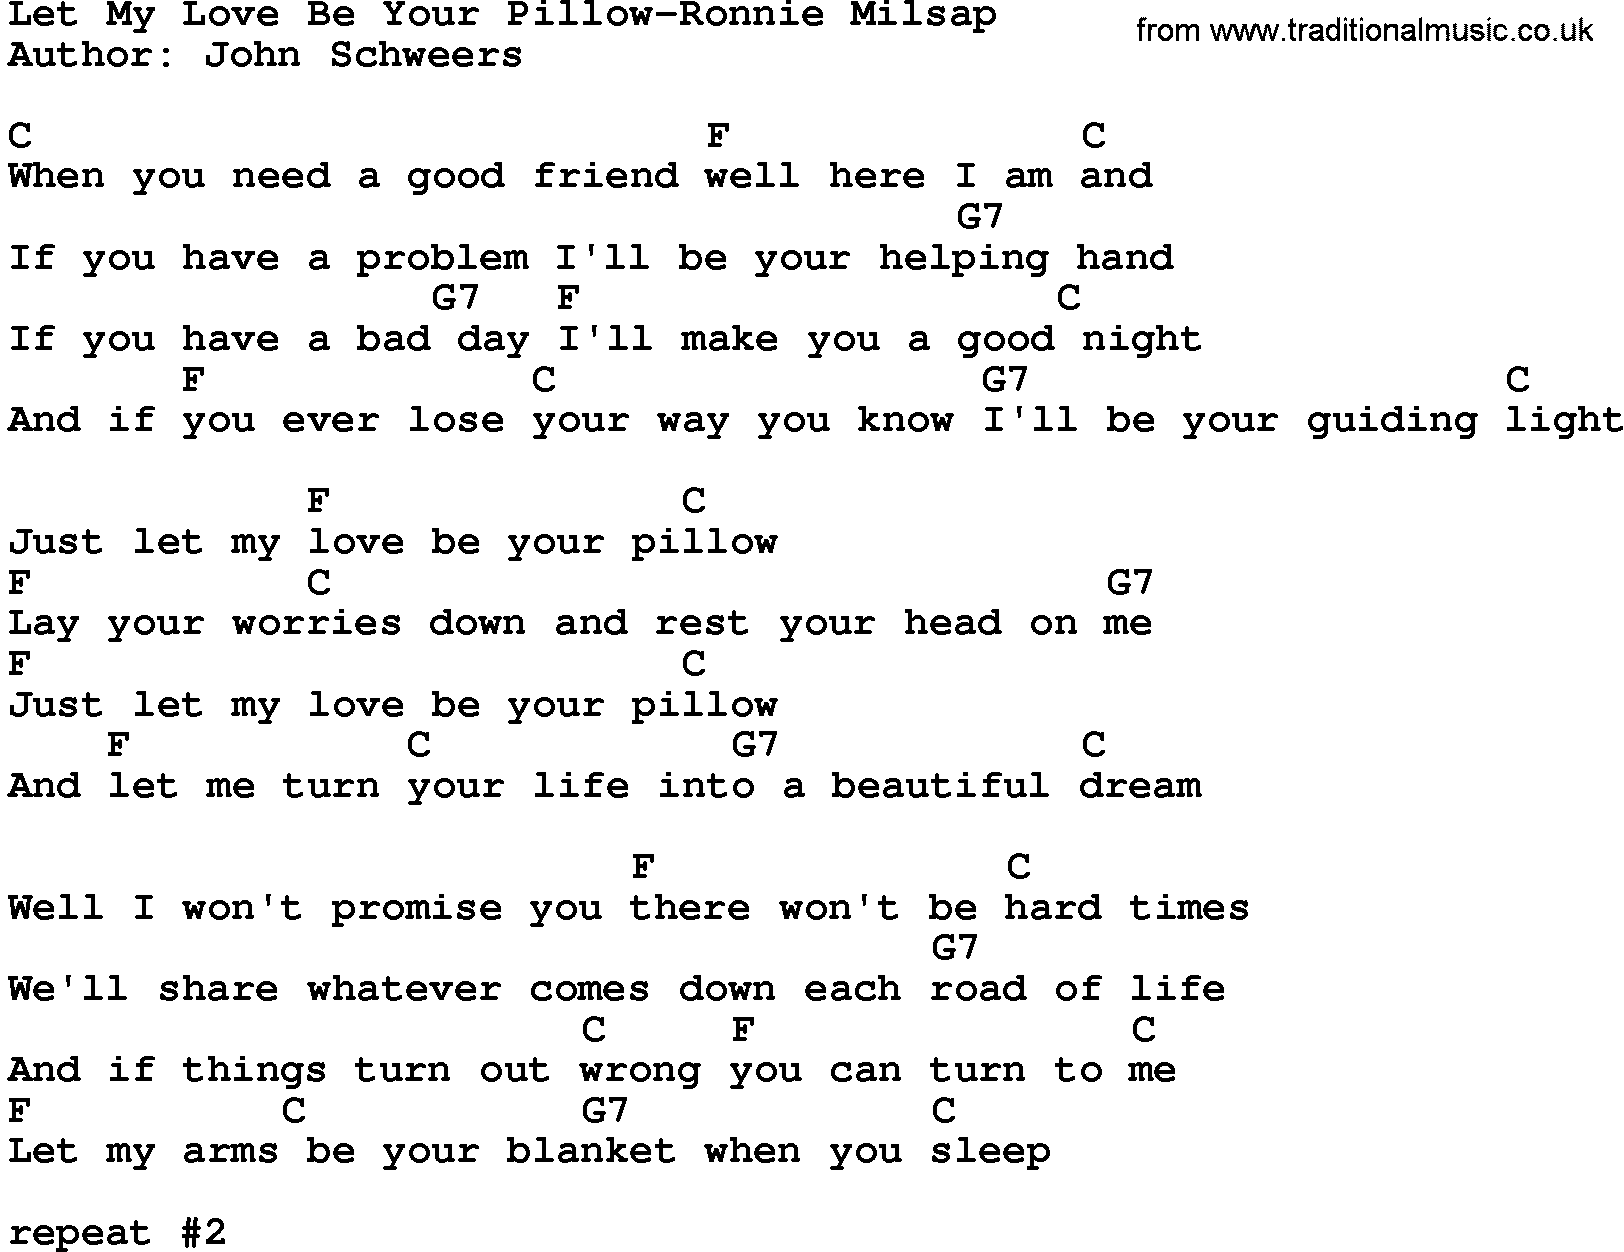 Country music song: Let My Love Be Your Pillow-Ronnie Milsap lyrics and chords